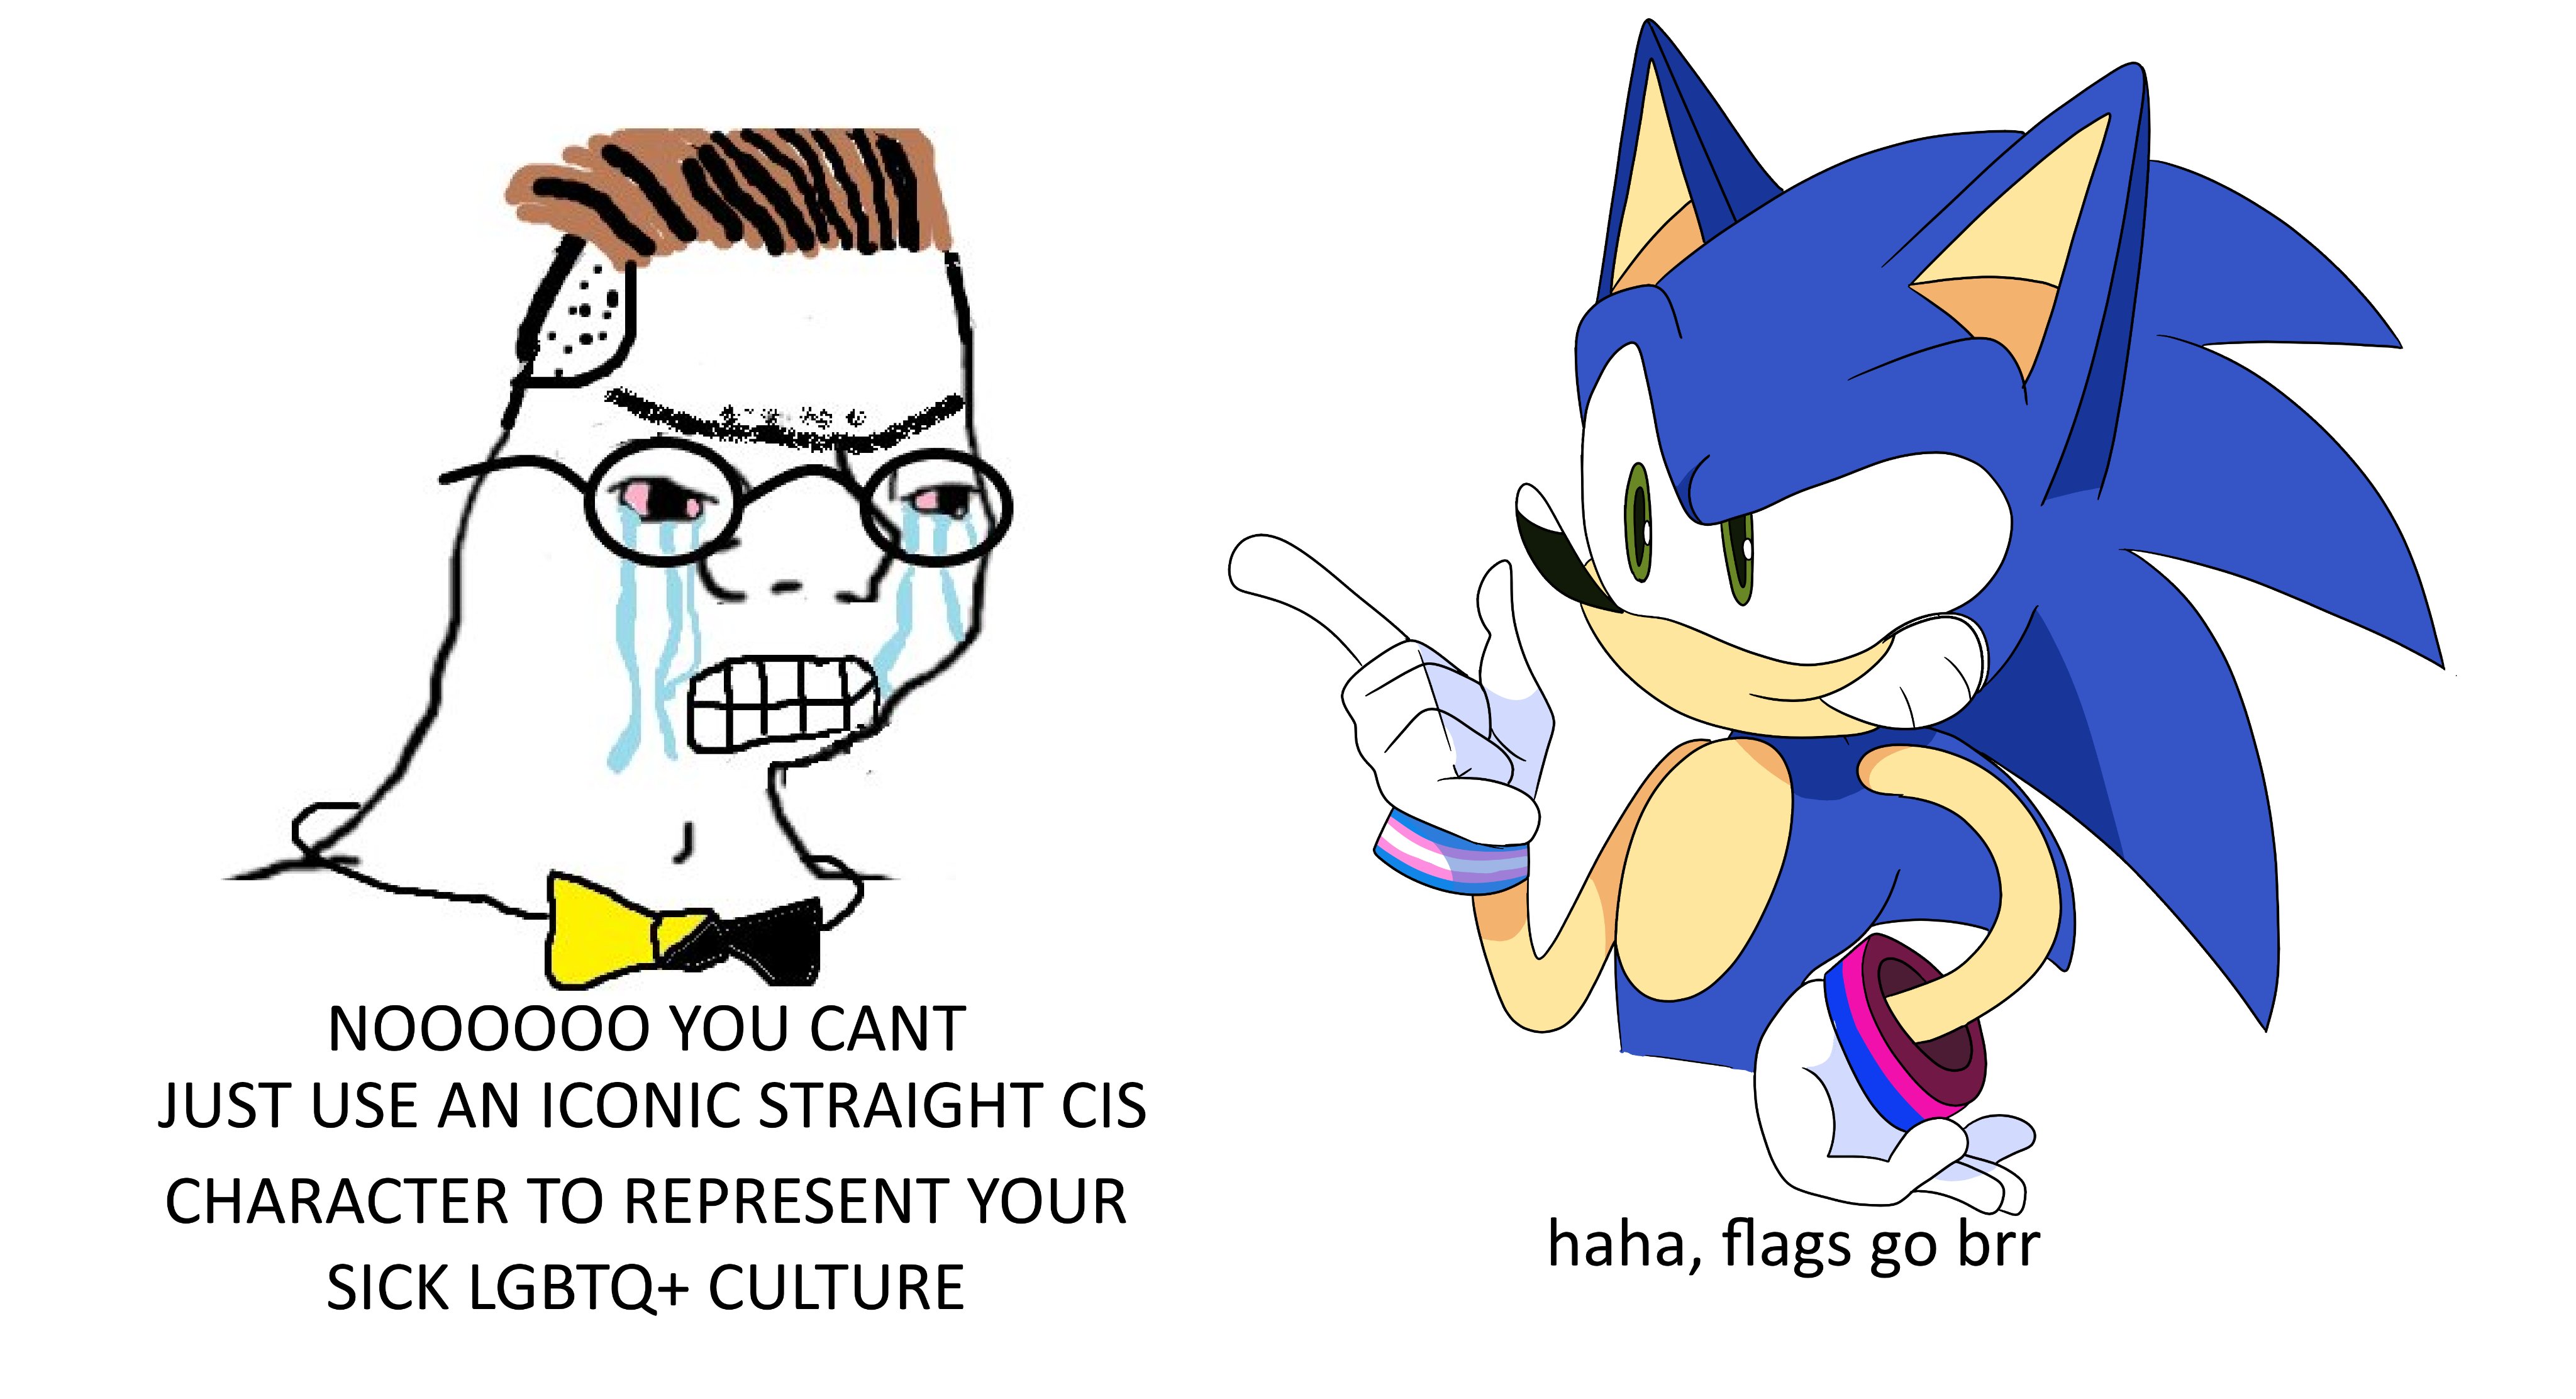 Why do so many people insist Sonic is trans? As a trans person